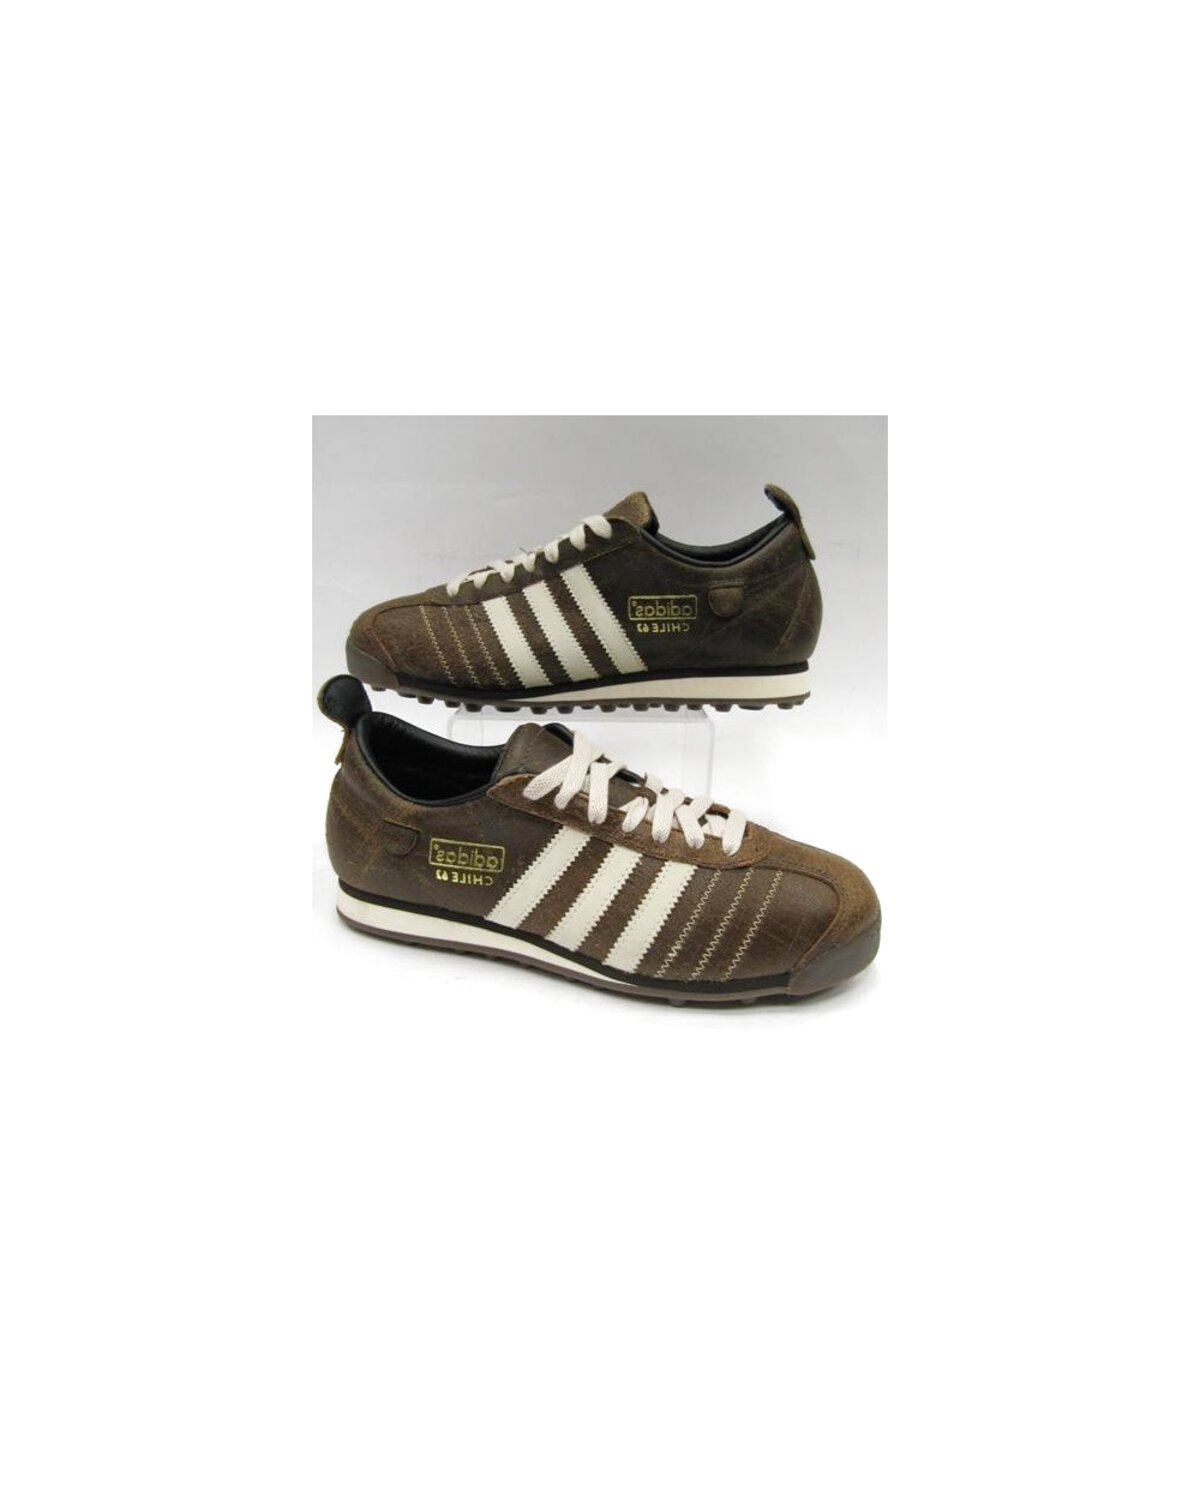 adidas chile 62 trainers size 12